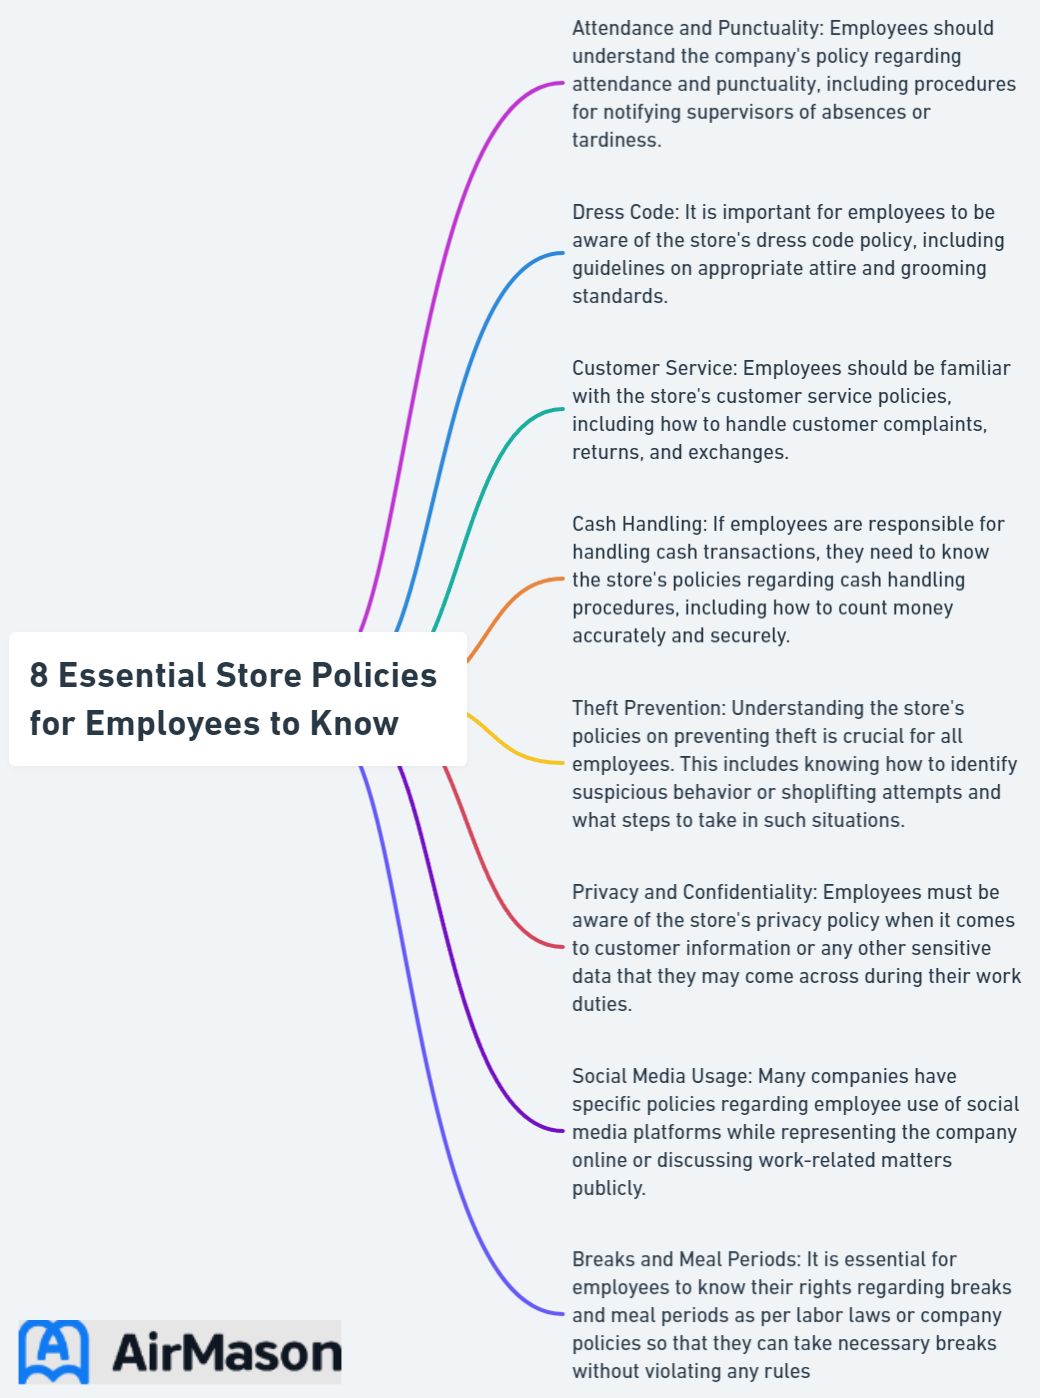 8 Essential Store Policies for Employees to Know